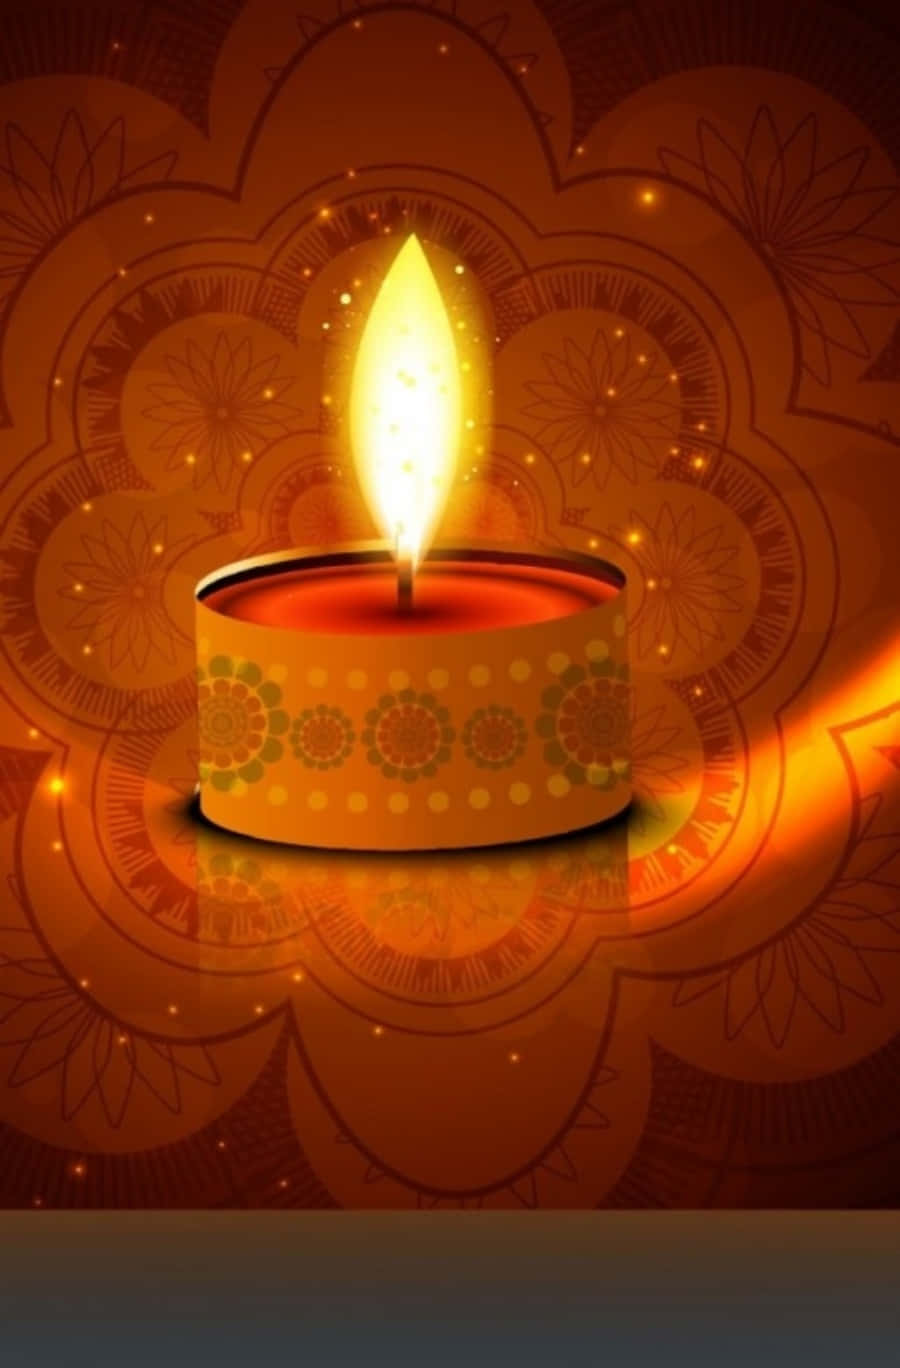 Diwali Greeting Card With A Candle On A Background